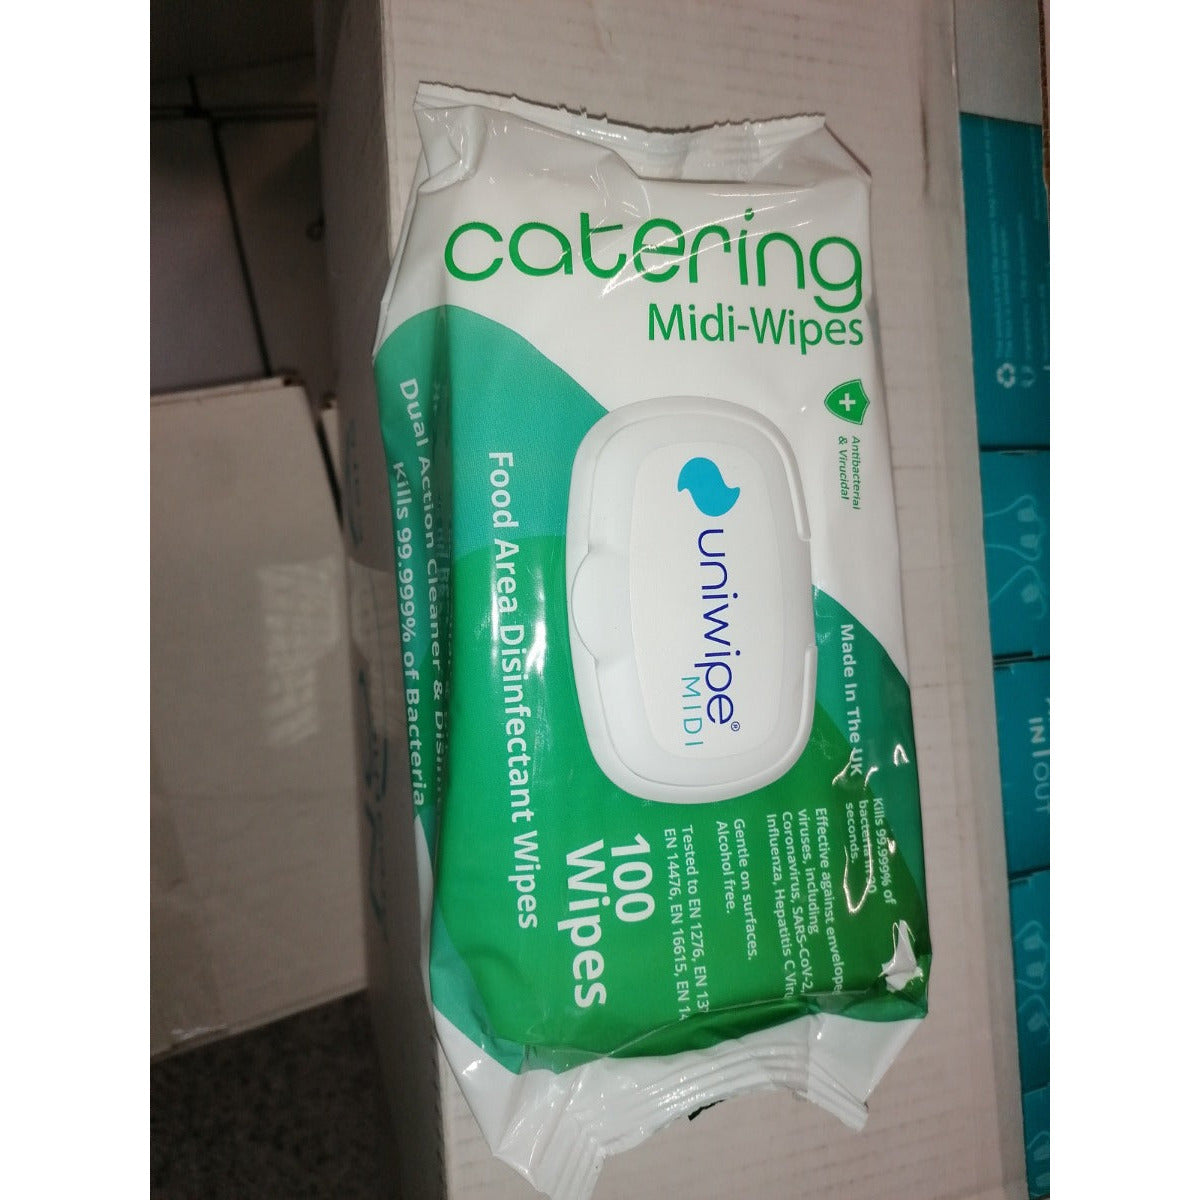 Uniwipe Catering Sanitising Midi-Wipes - Pack of 100- CLEARANCE